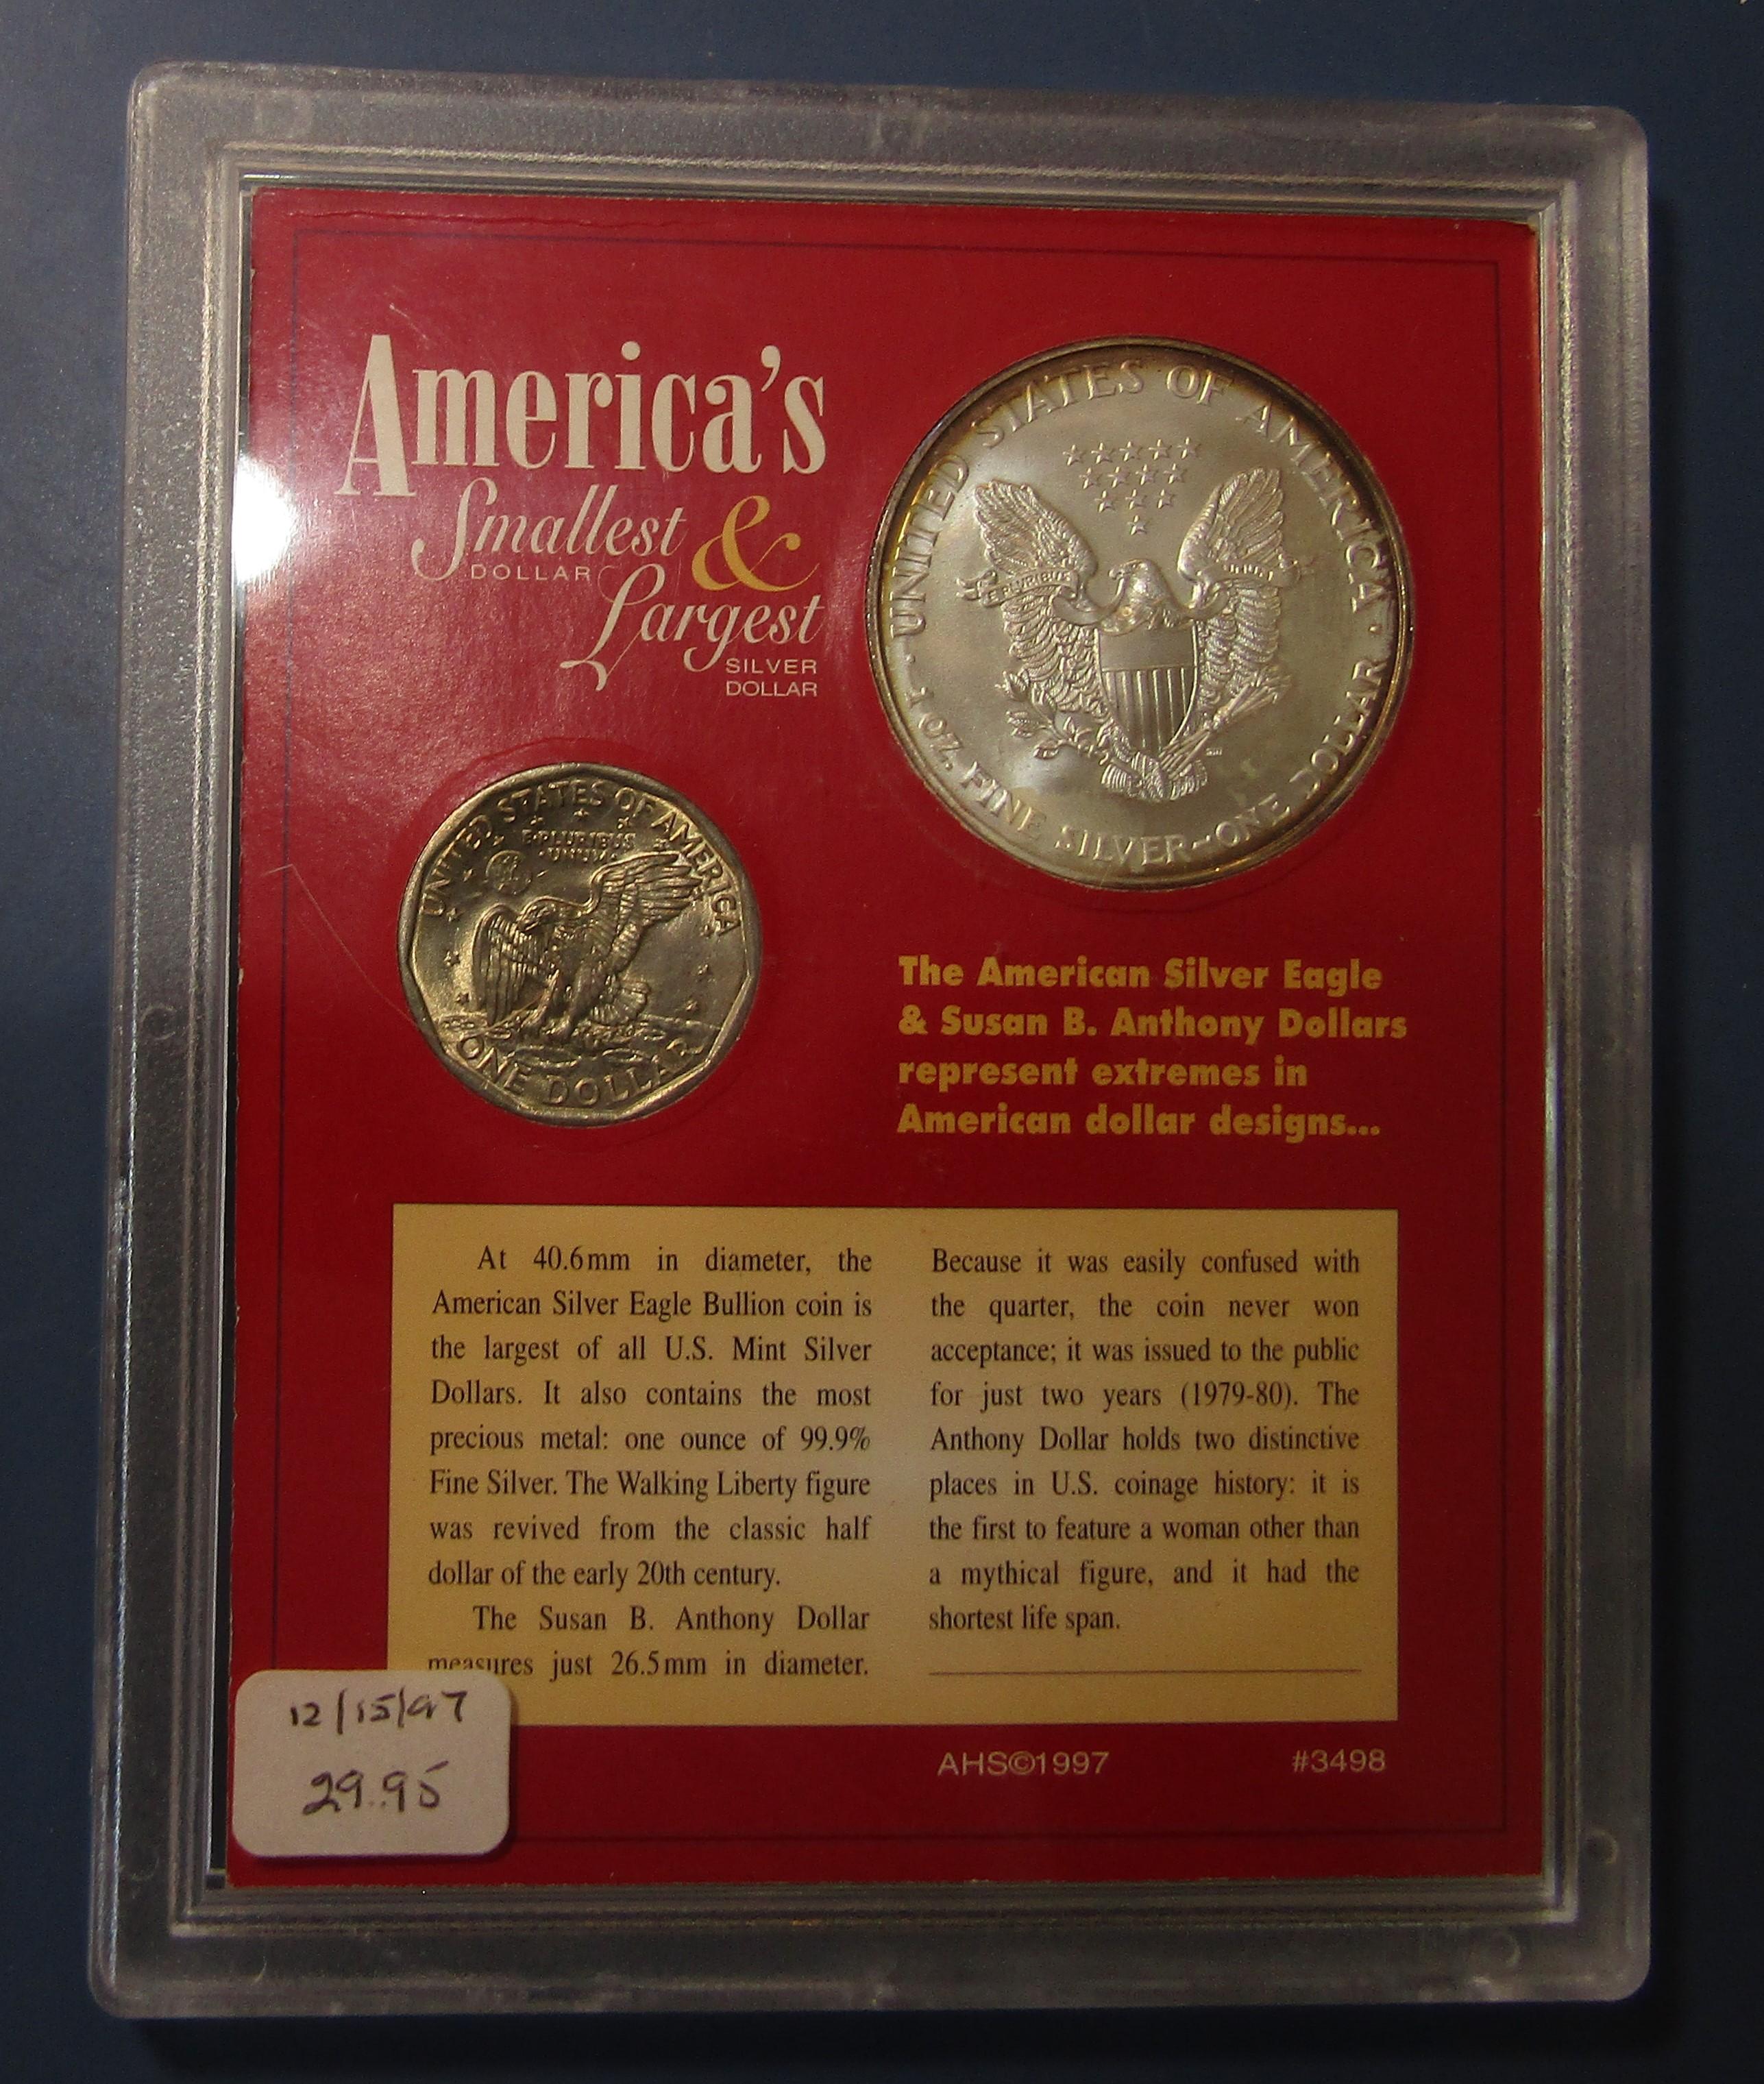 AMERICA'S SMALLEST & LARGEST DOLLARS (2 COINS)